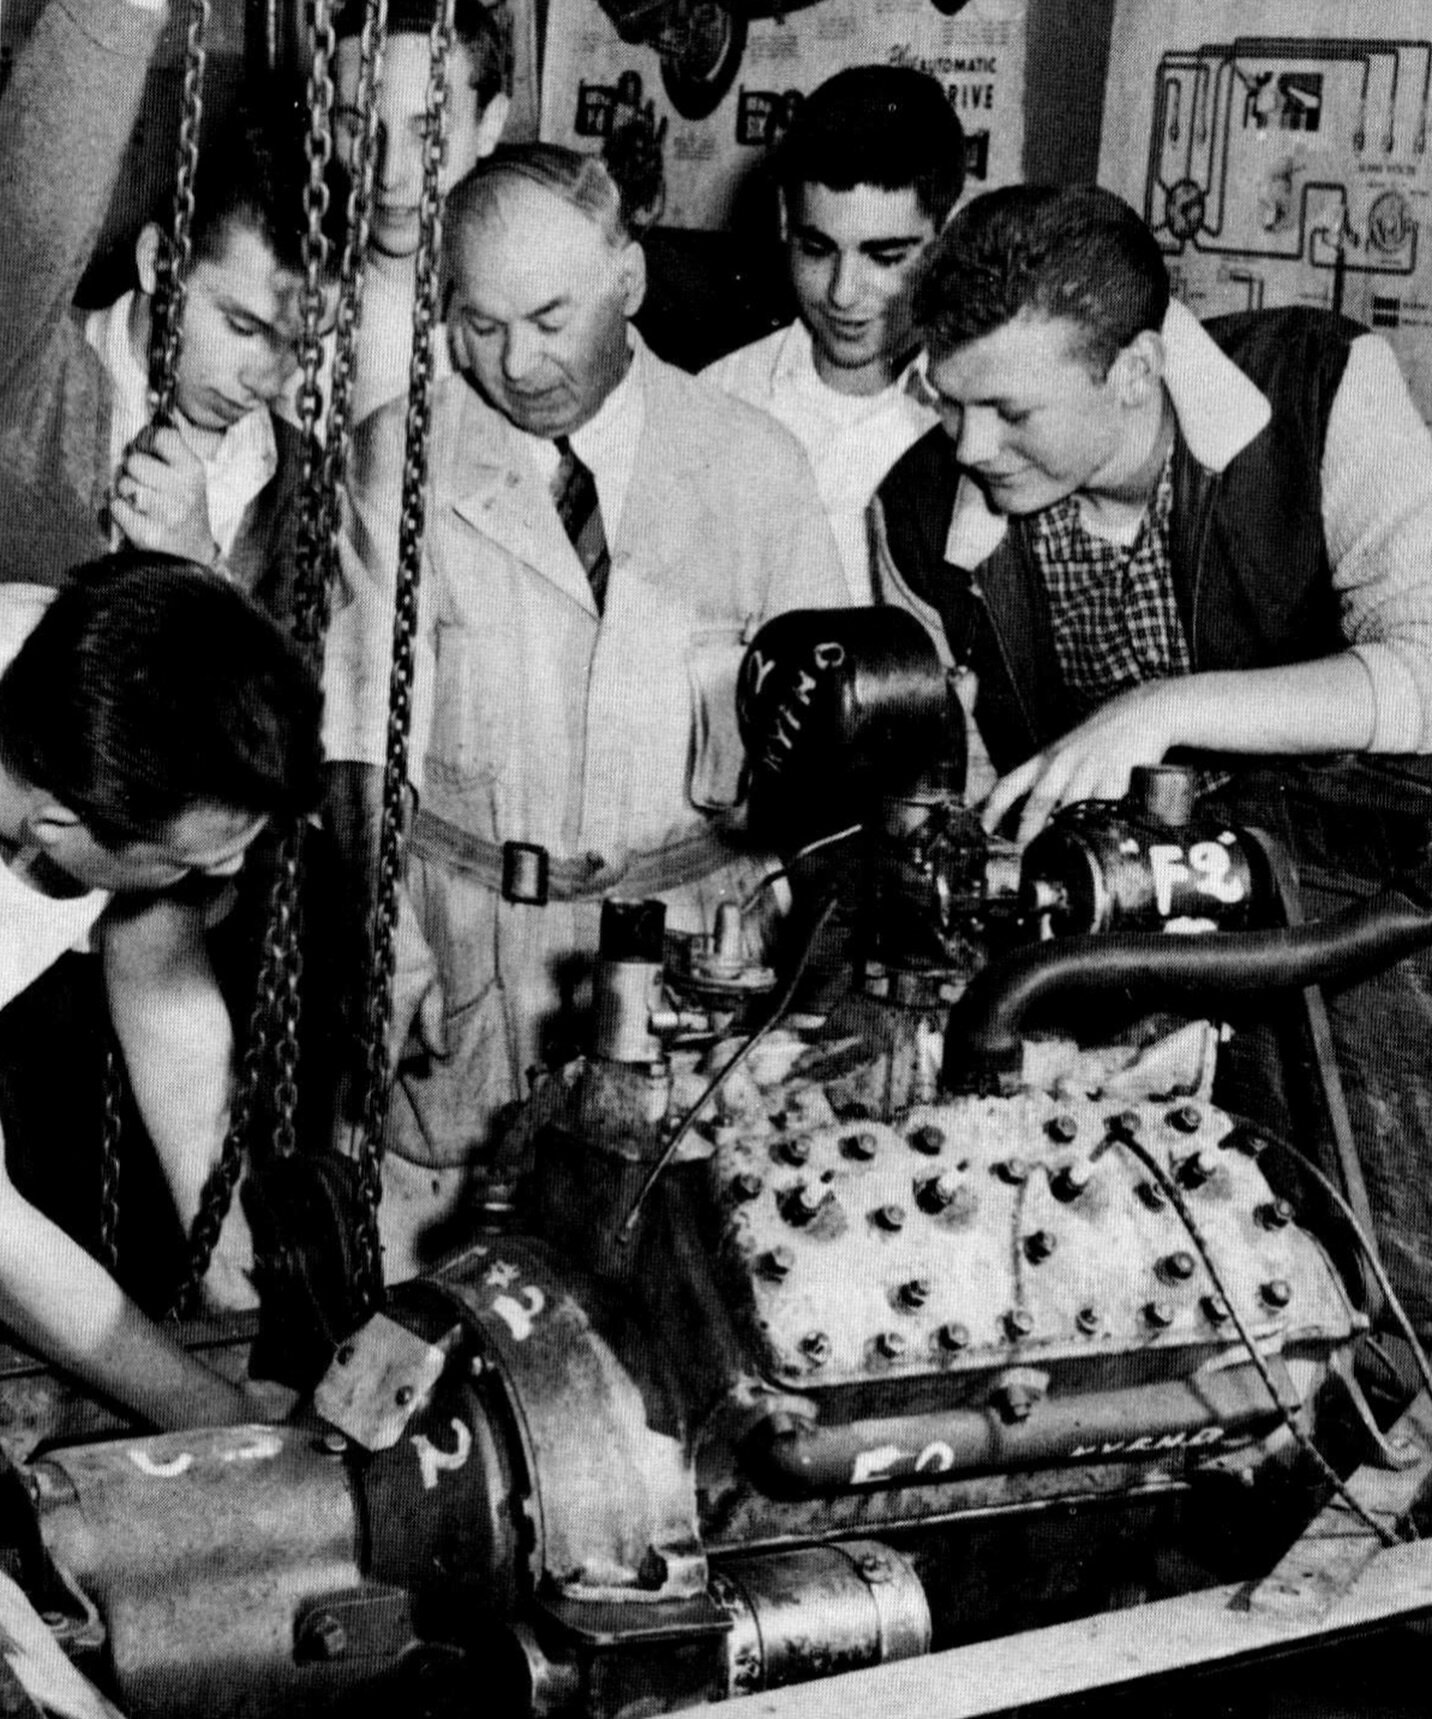 Start your engines&hellip;..

🚙🚗🚕 Auto shop at Scarsdale High School in 1959.

📸: Scarsdale High School 1959 Yearbook at @scarsdalelibrary